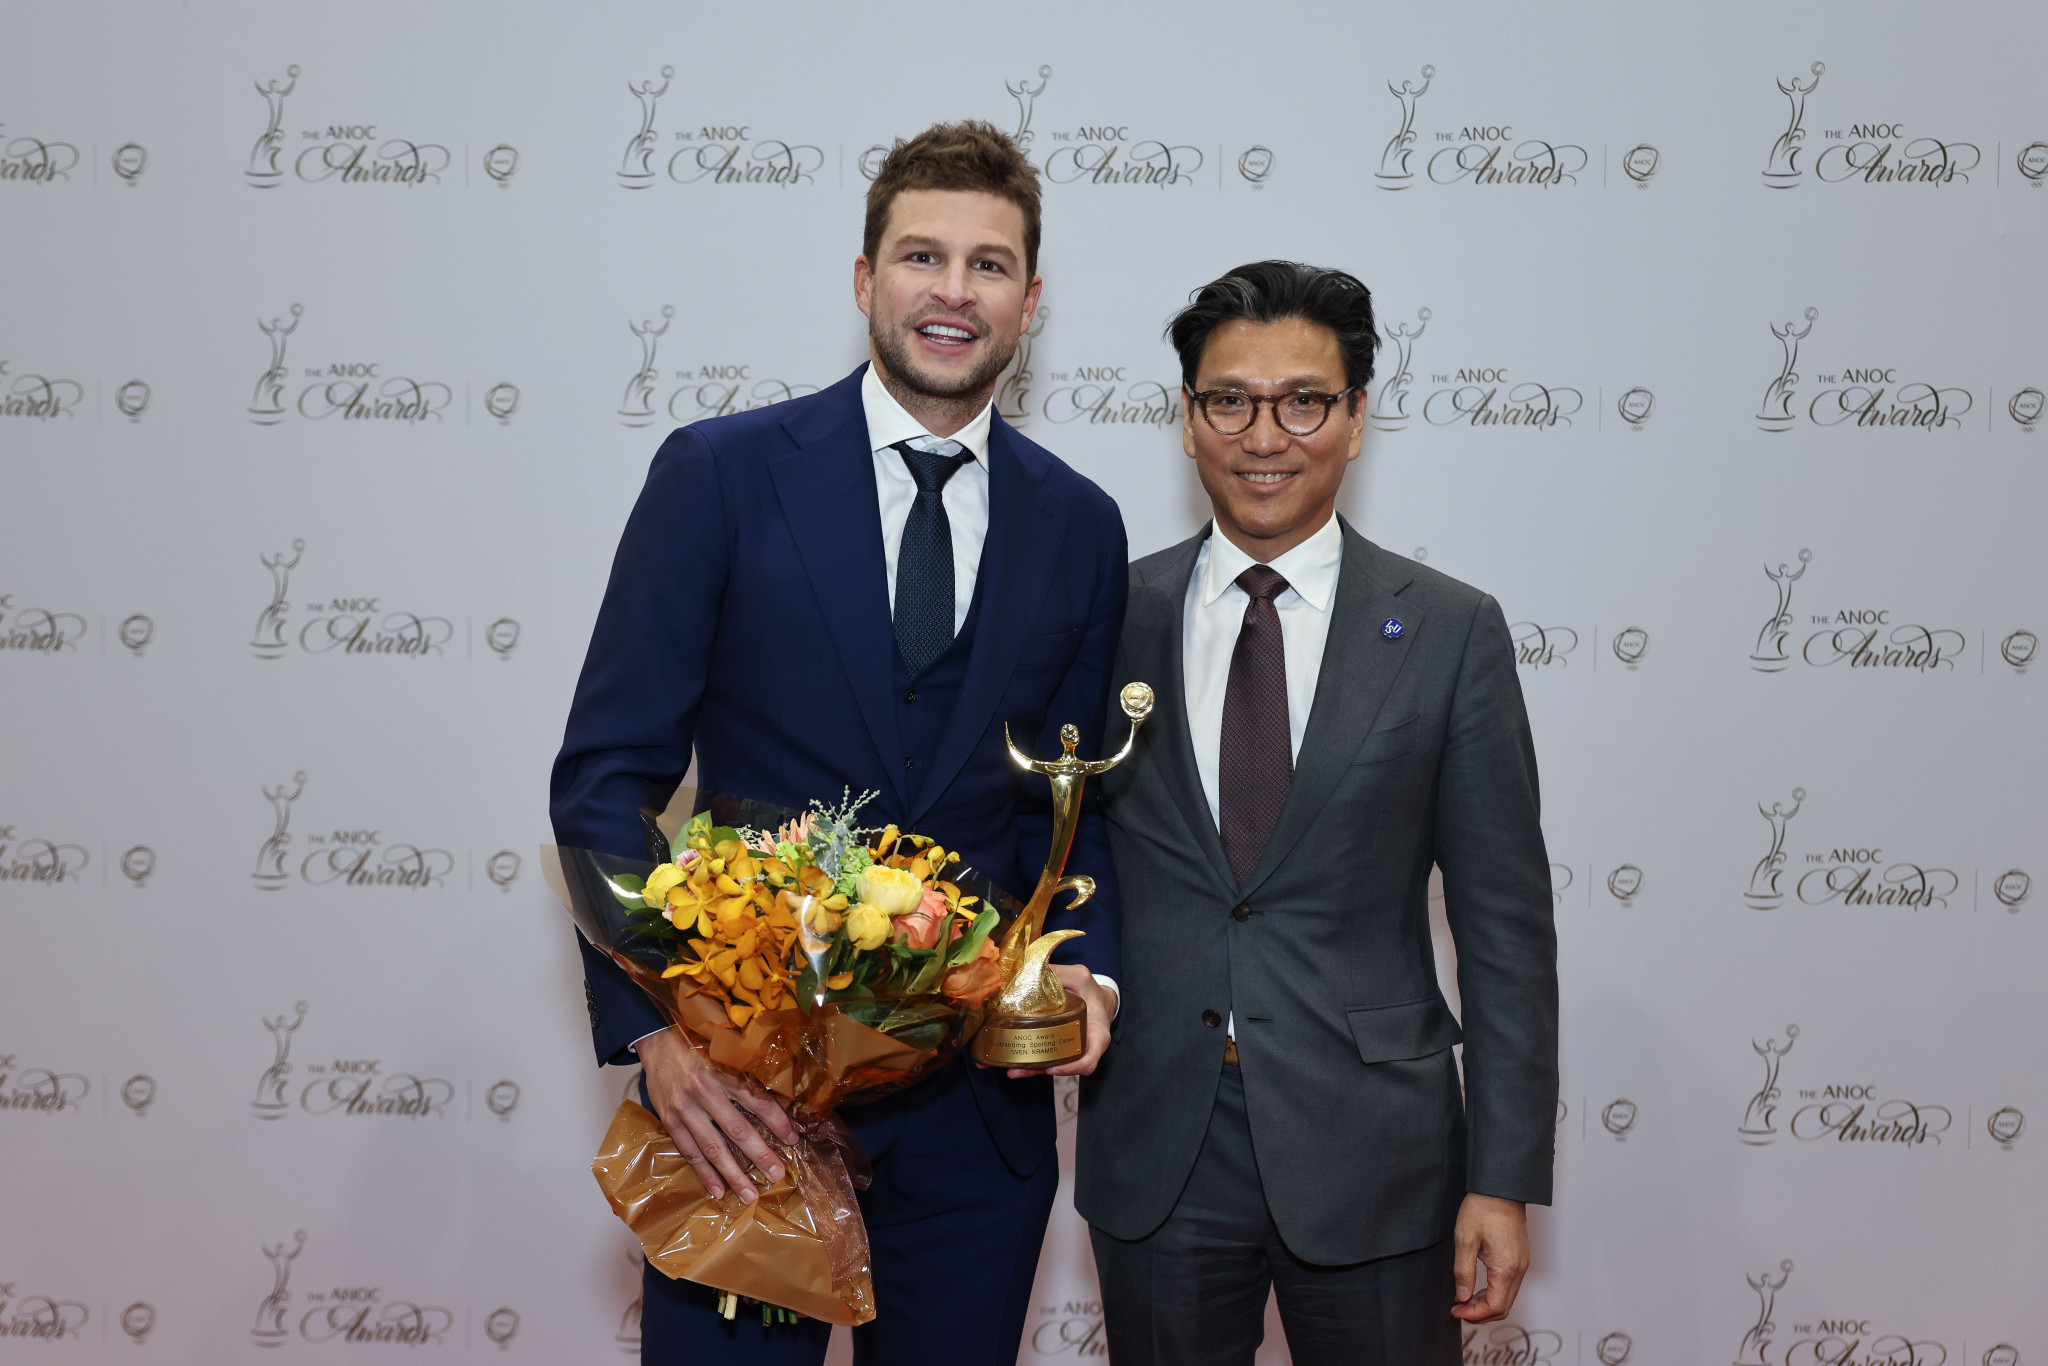 Dutch four-time speed skating champion Sven Kramer stands next to International Skating Union President Kim Jae-youl  after winning the outstanding athlete performance award ©ANOC